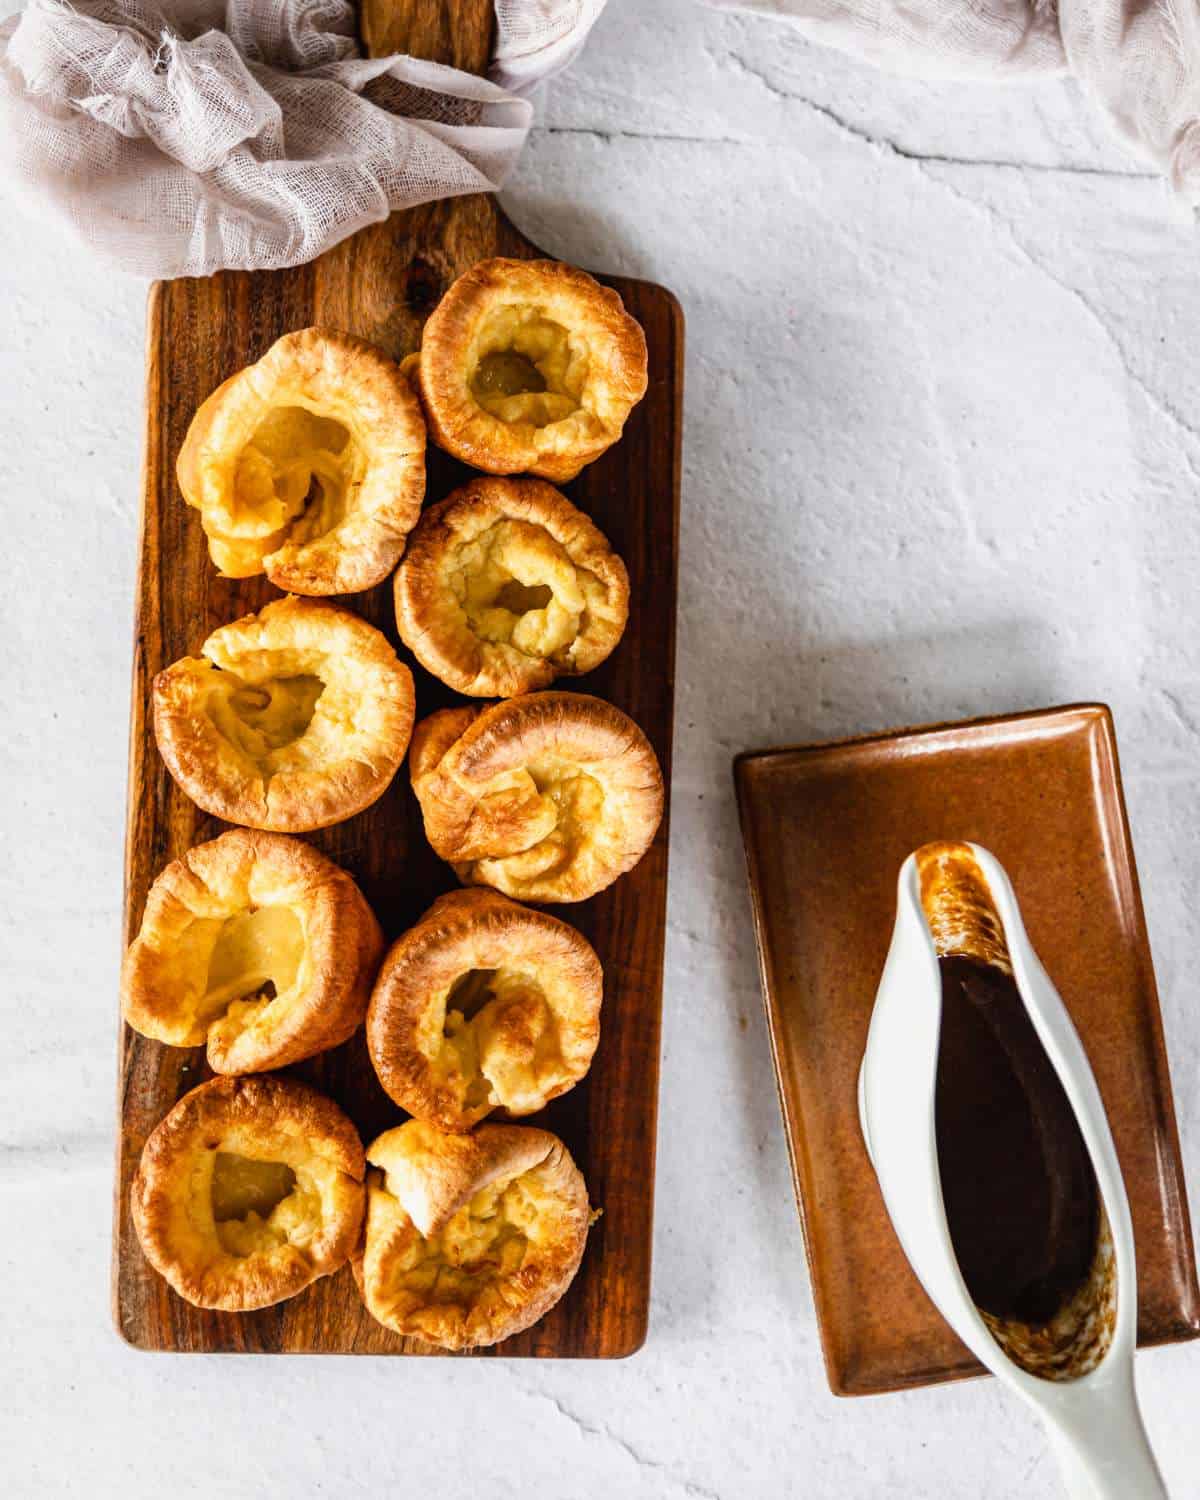 An overhead pictures of nine Yorkshire Puddings on a wooden chopping board with a rich brown gravy to the side.